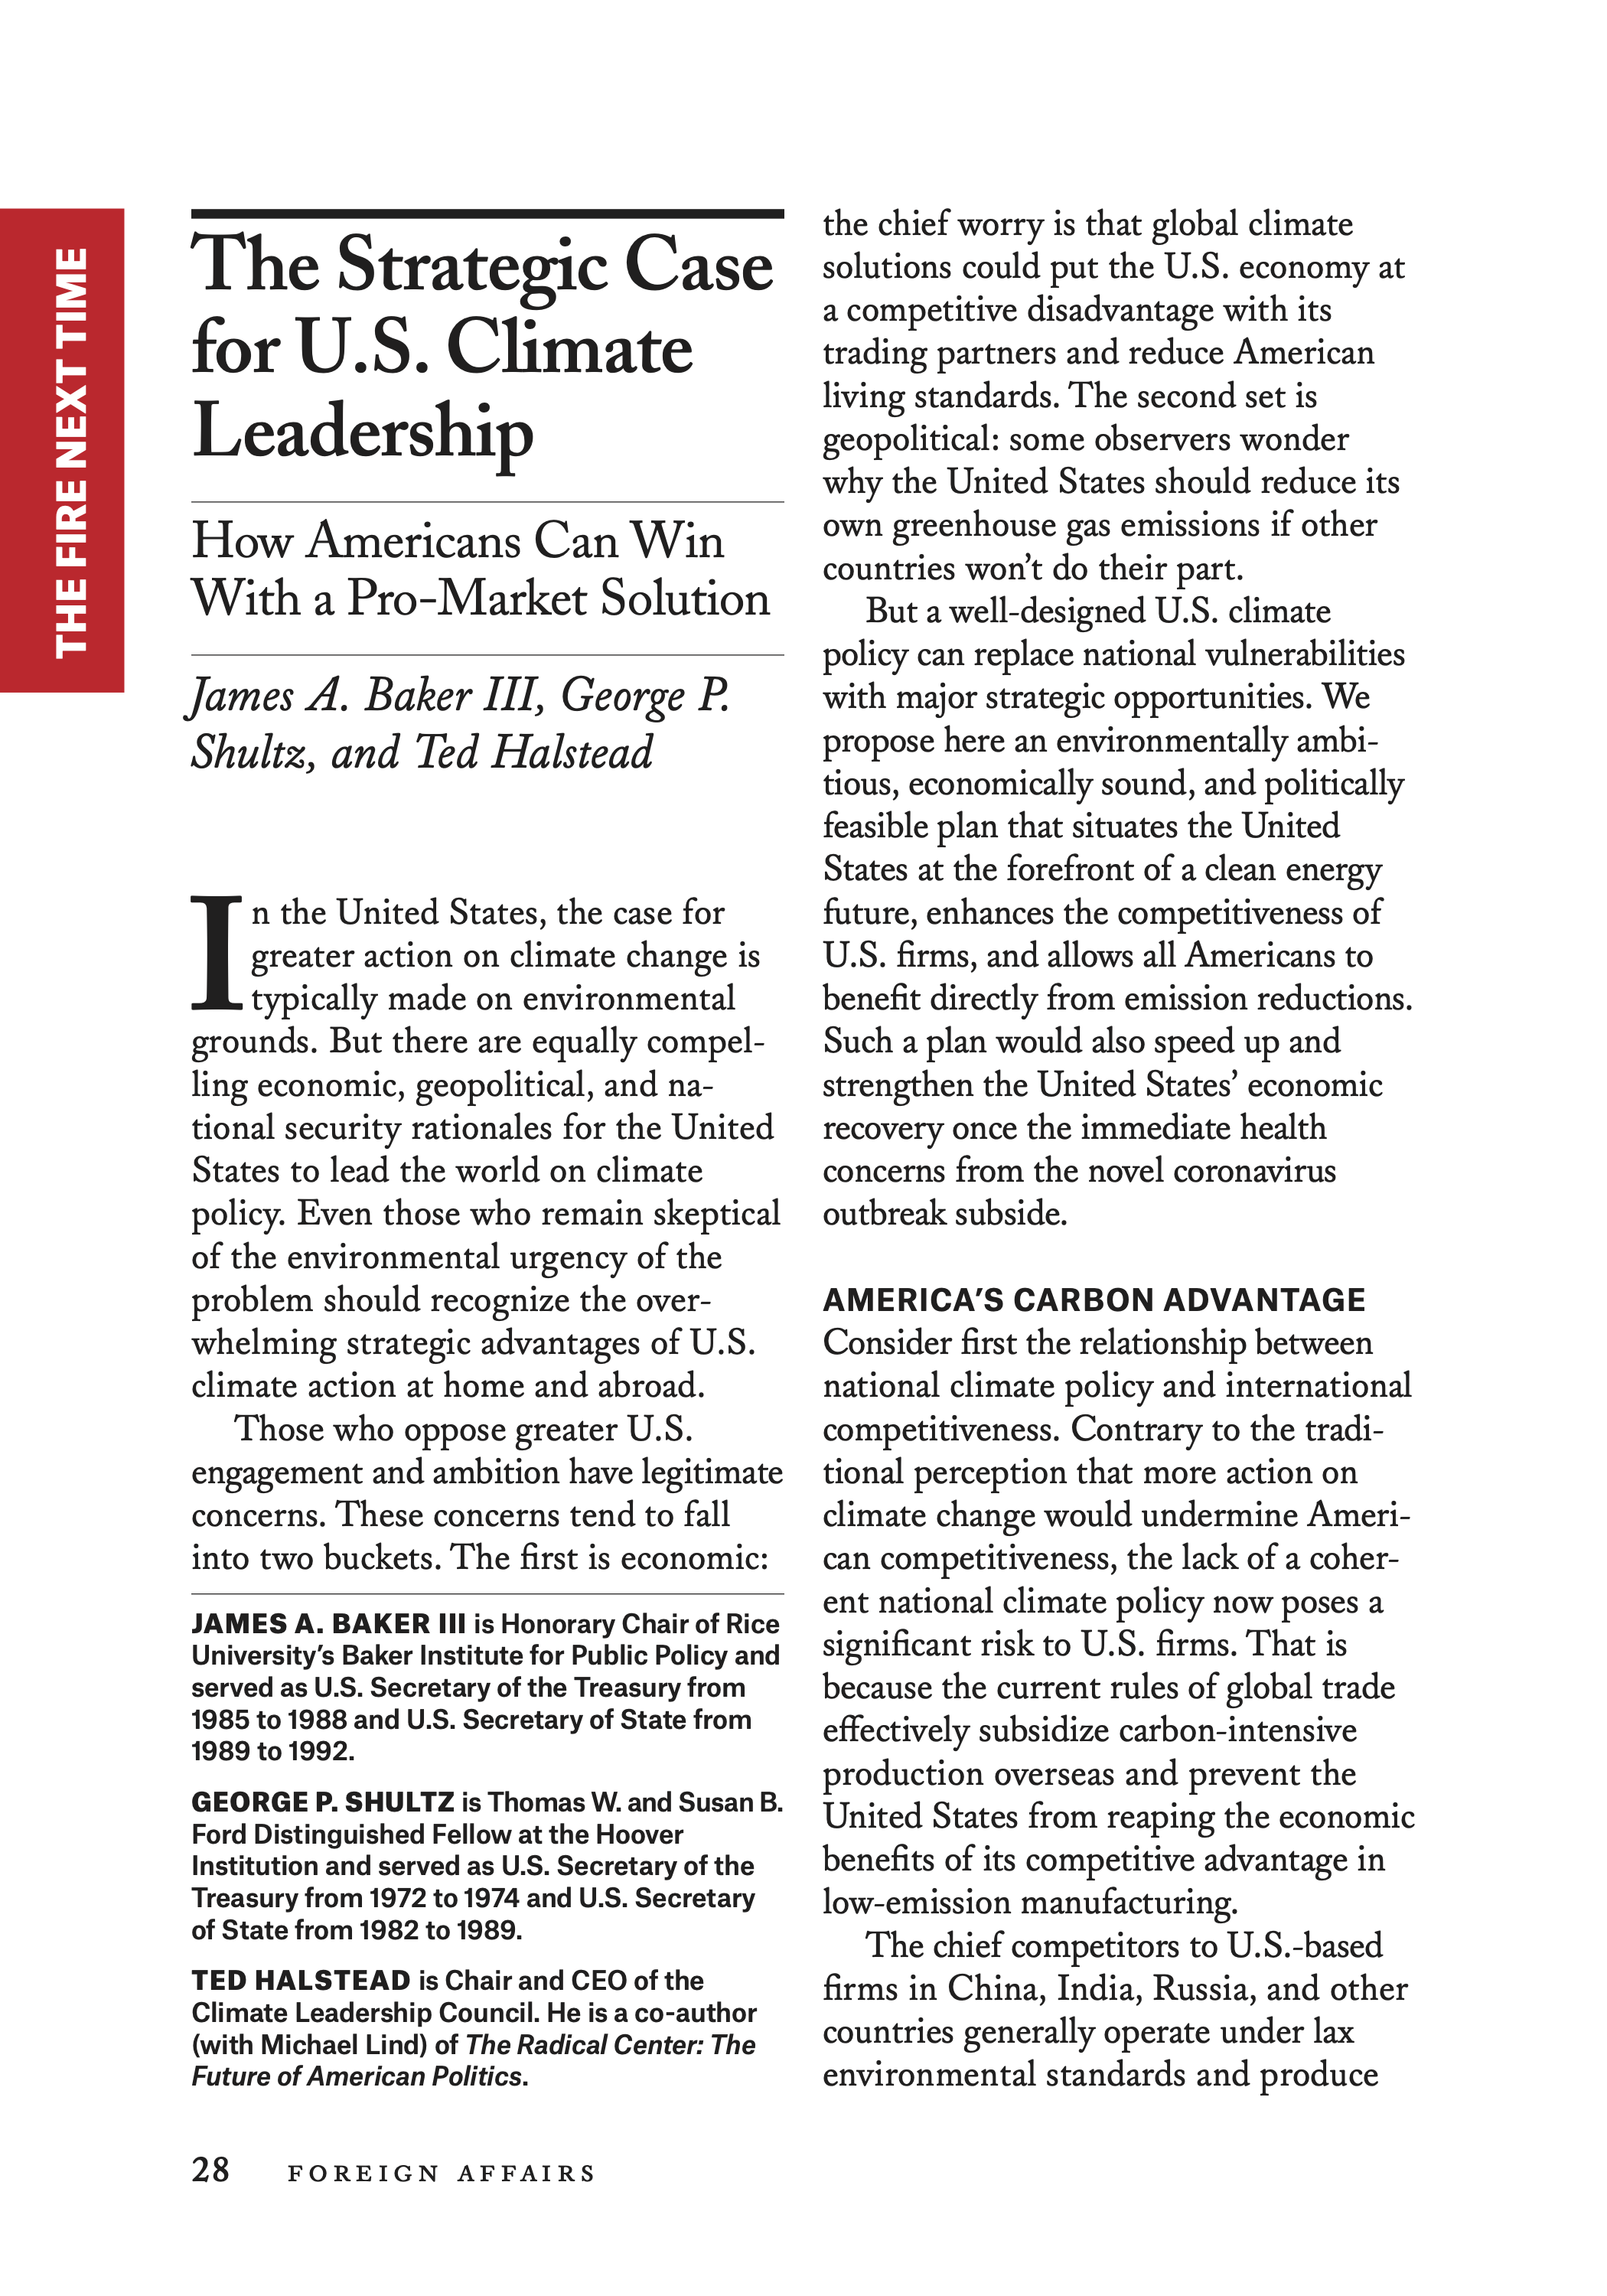 The Strategic Case for U.S. Climate Leadership Page 1.png